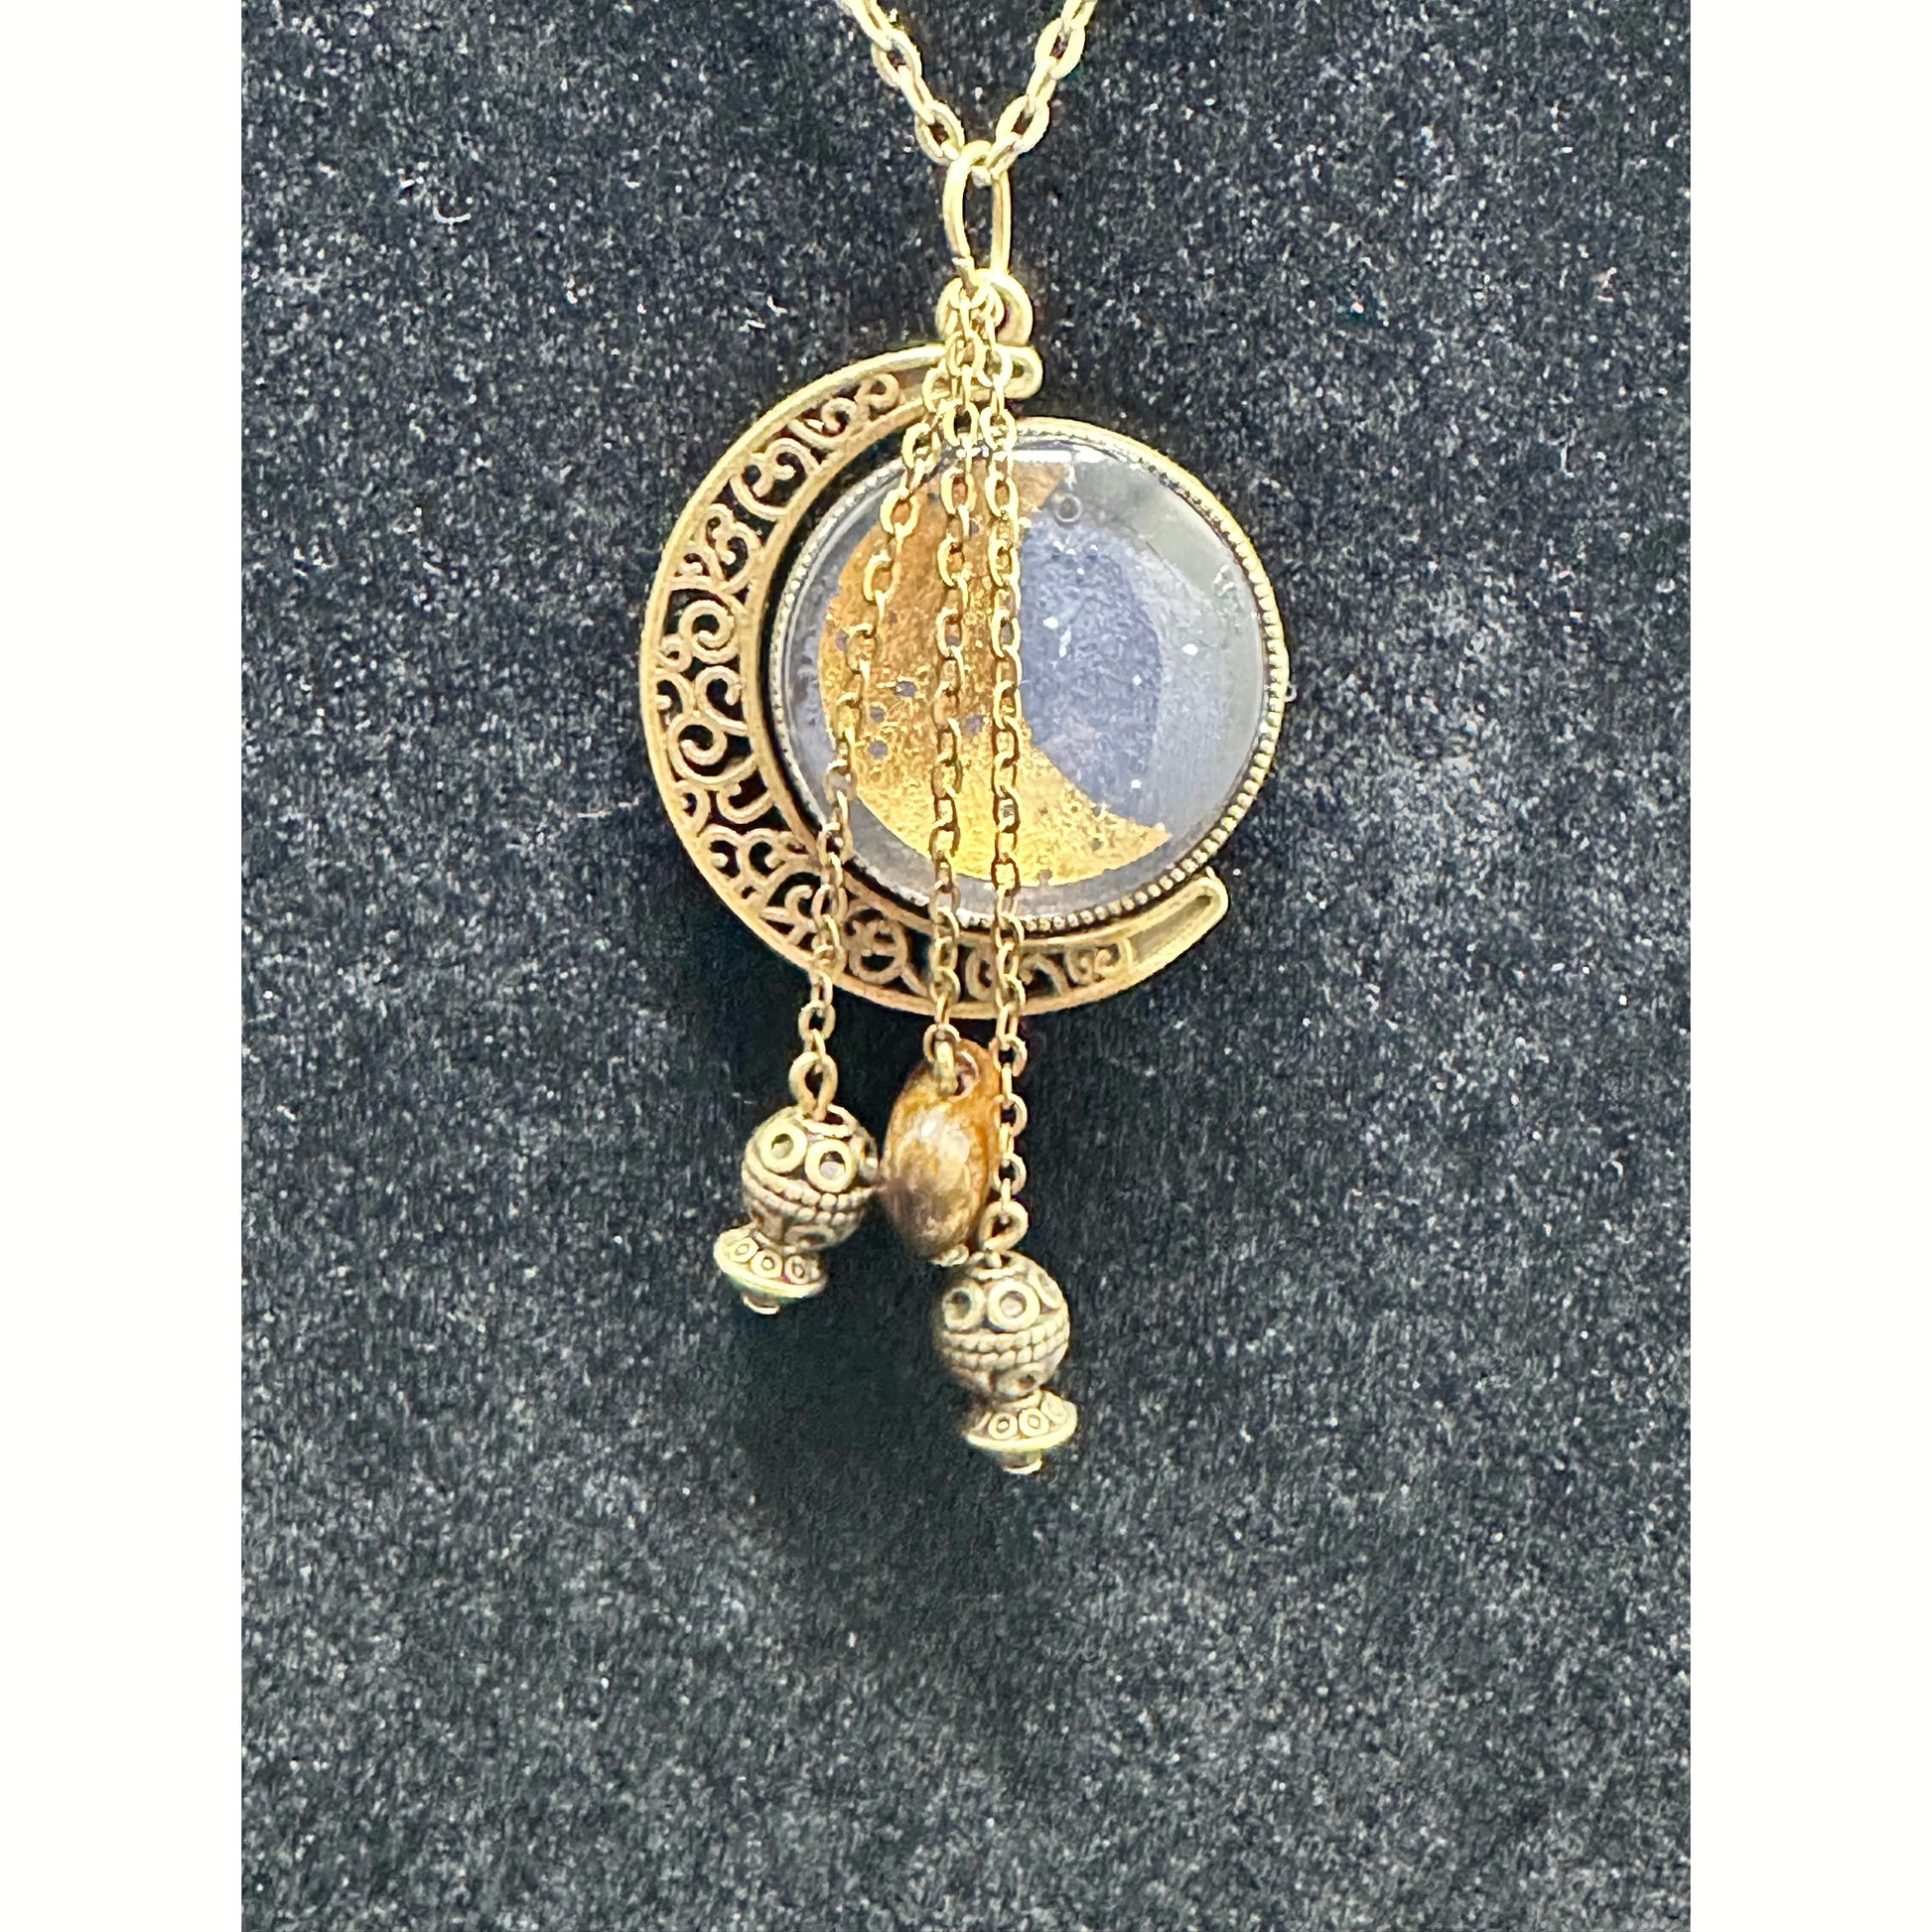 Moonshine 1 Pendant Necklace - Rhapsody and Renascence